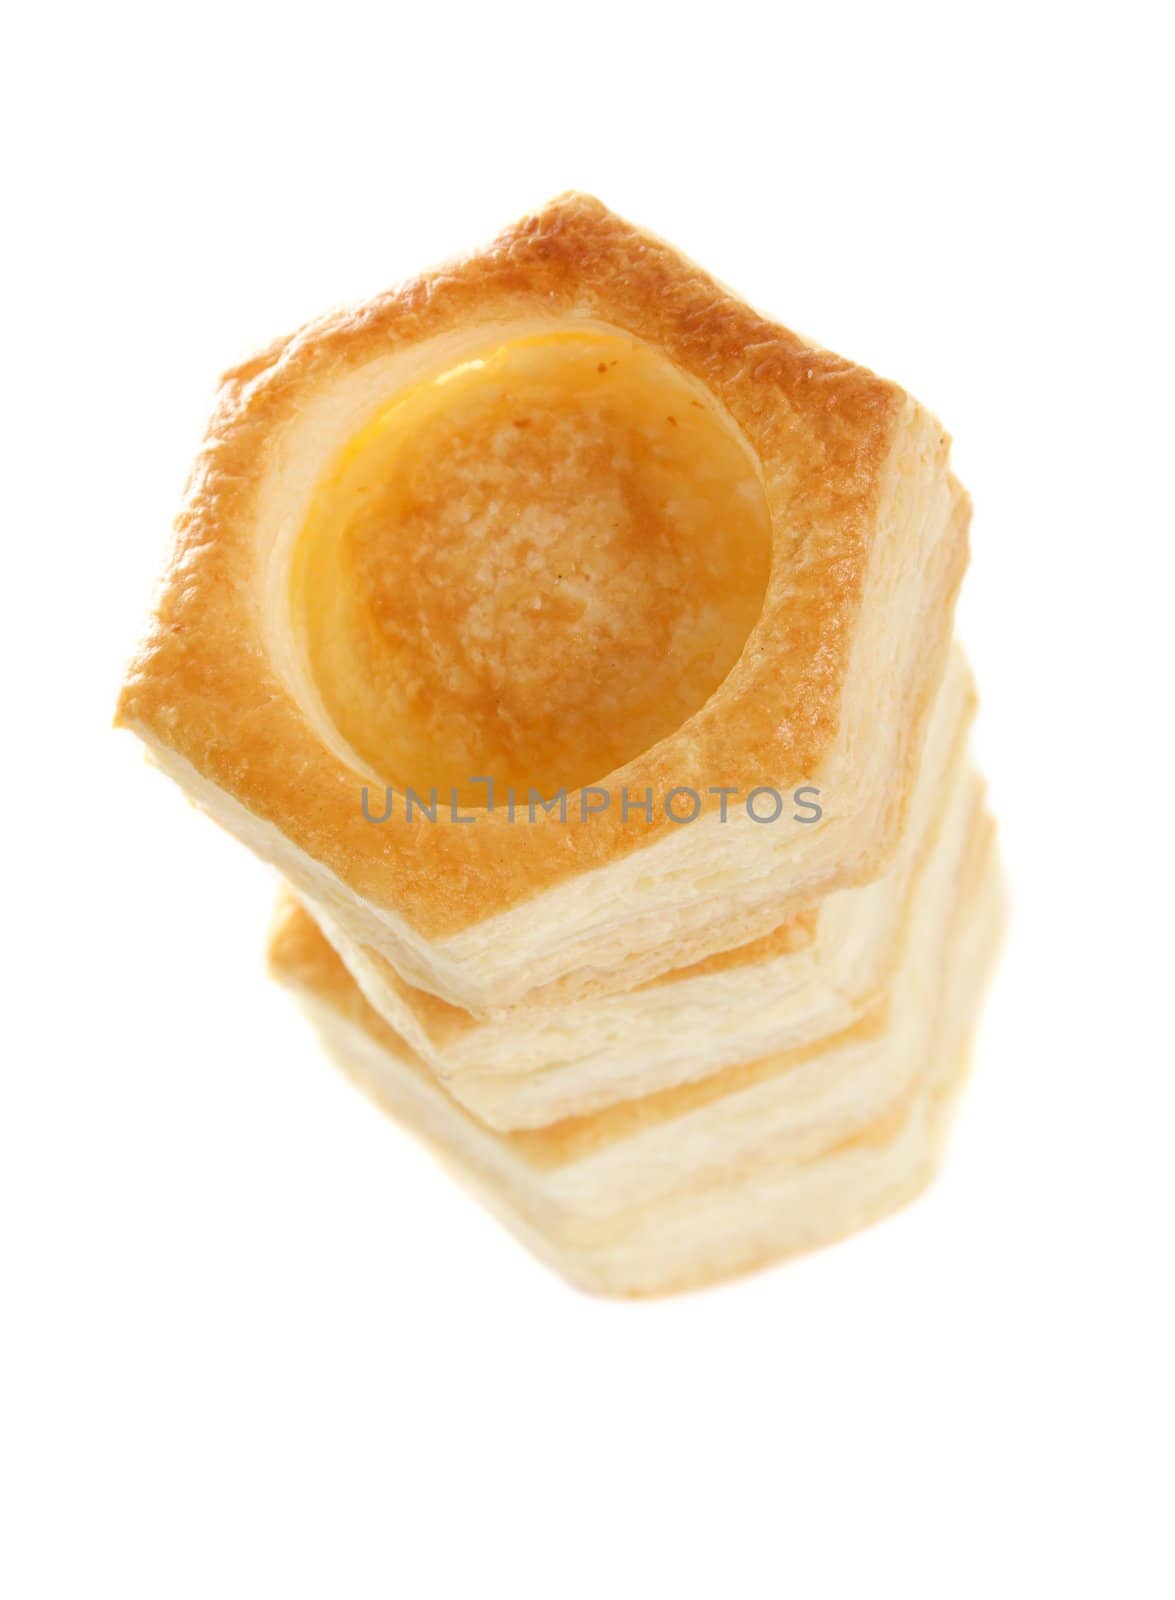 vol-au-vent pastry shell, white background